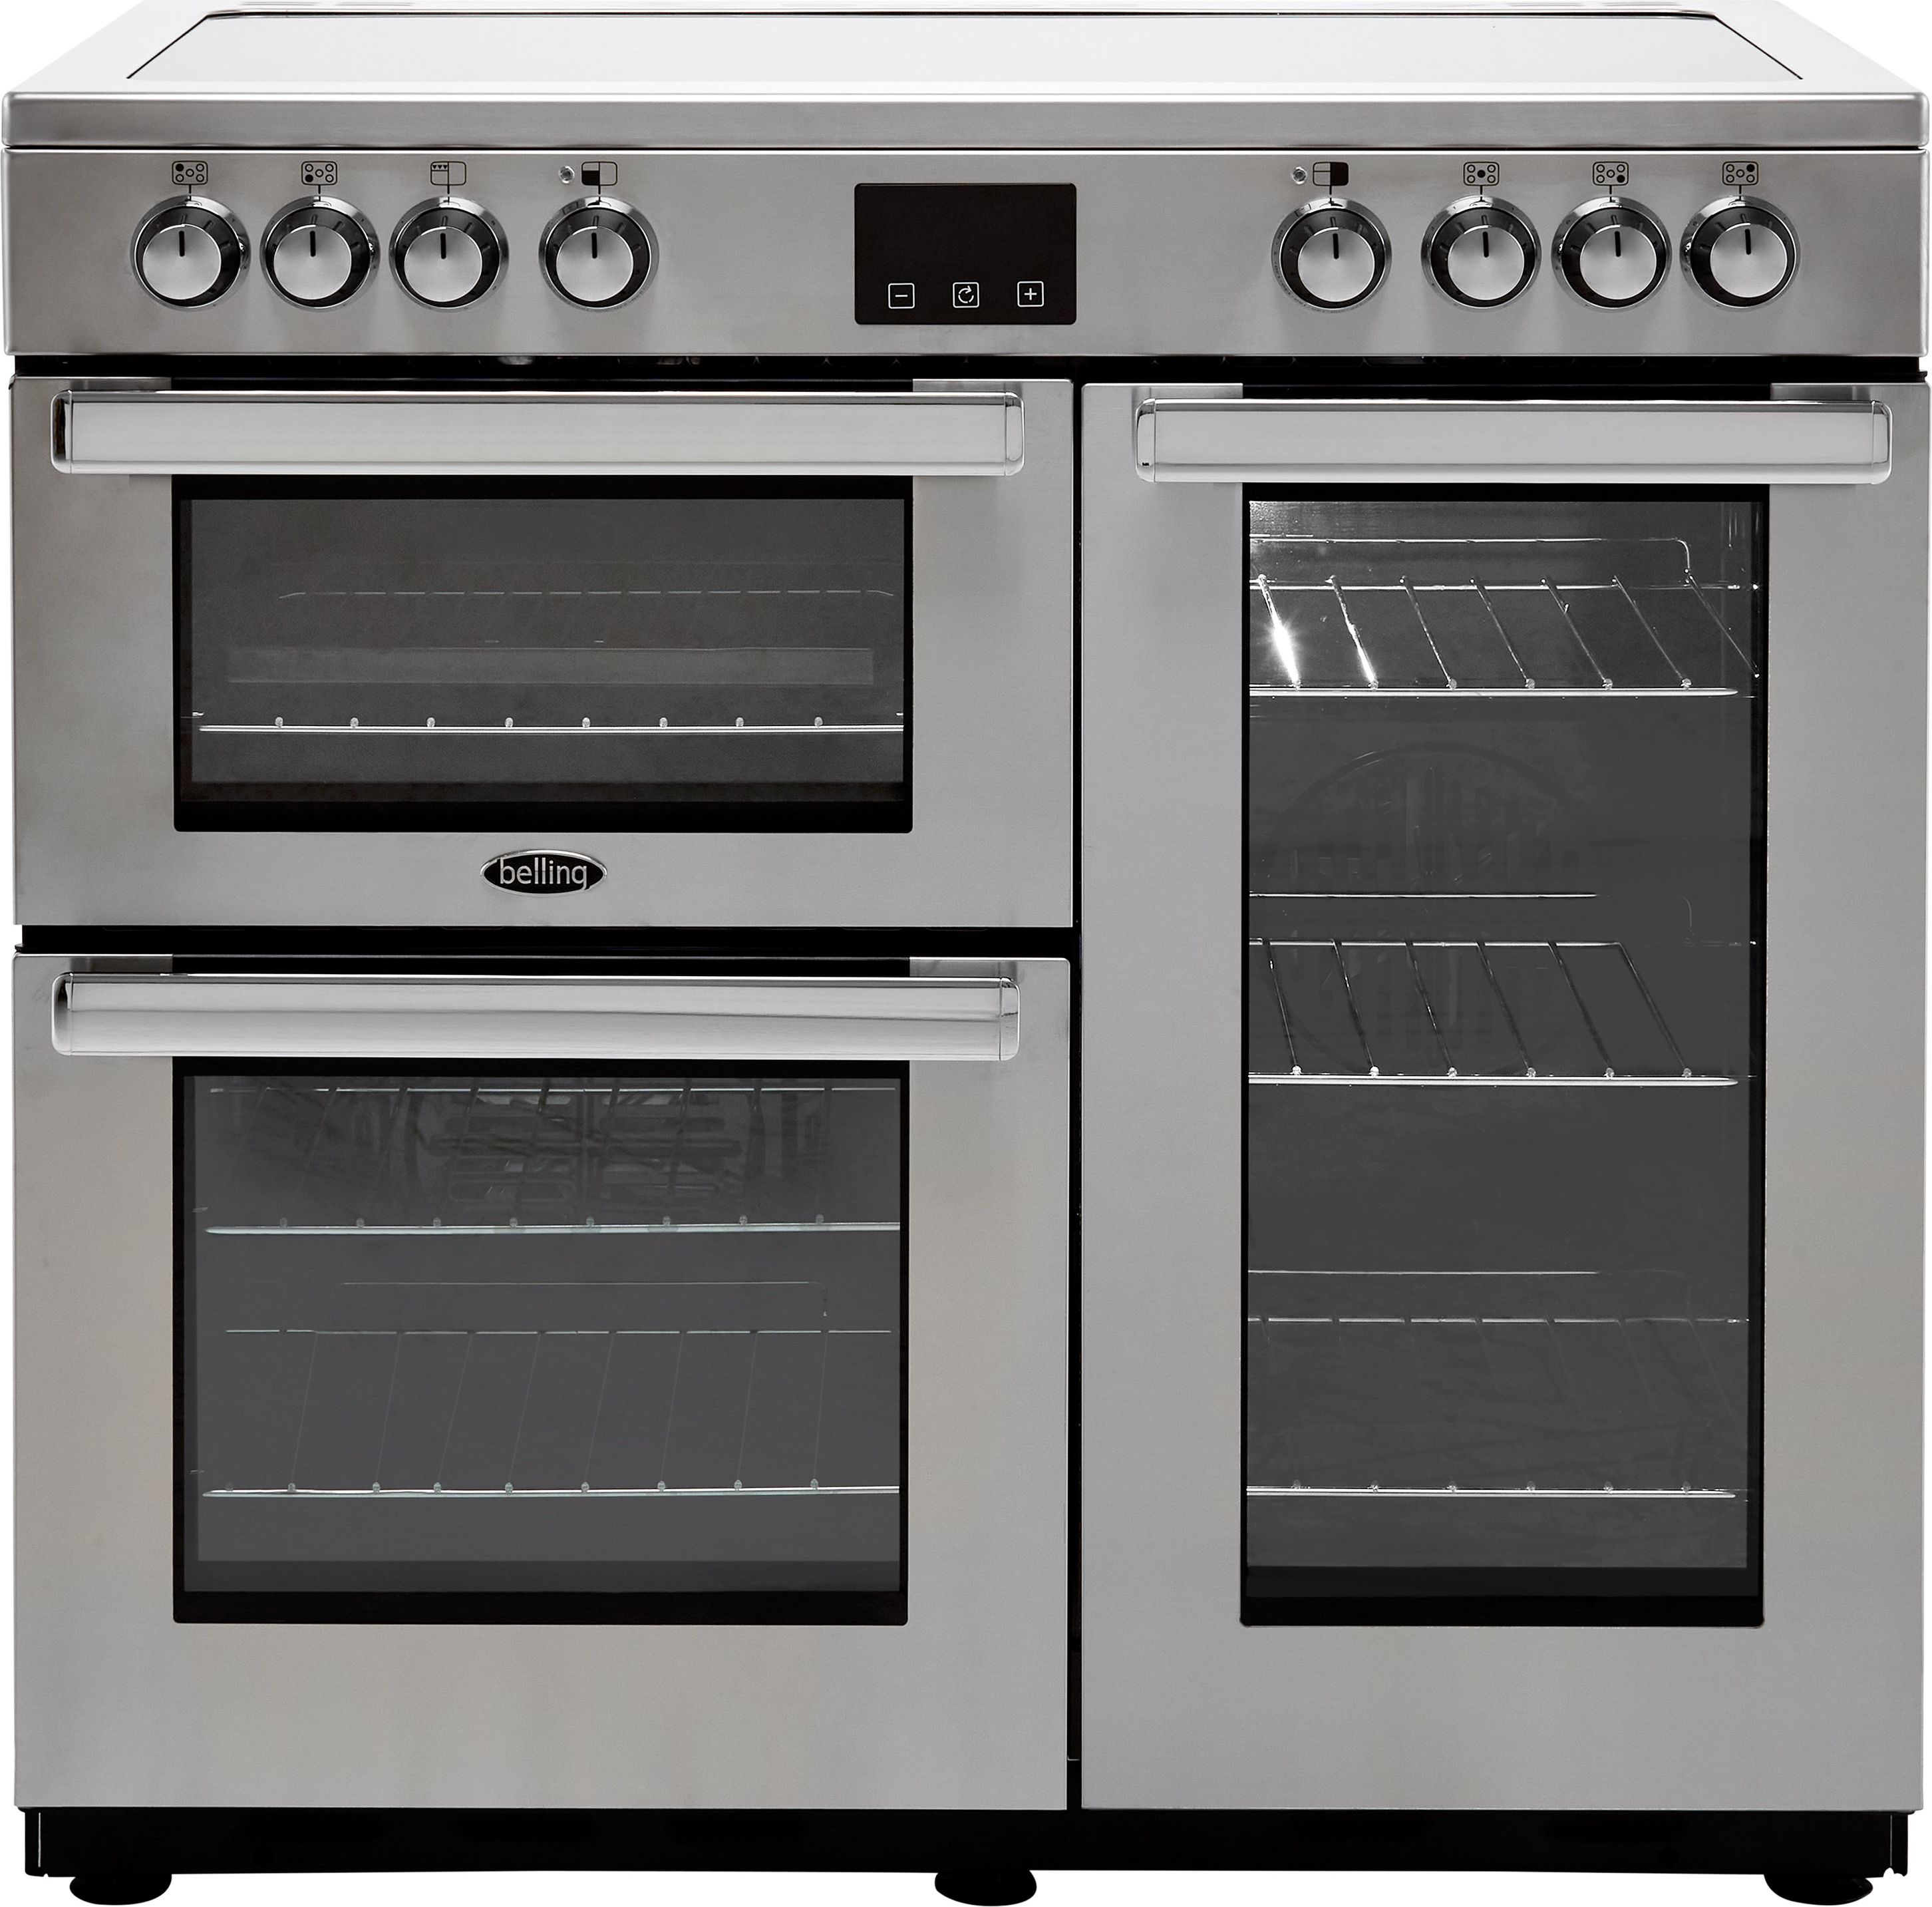 Belling Cookcentre90EProf 90cm Electric Range Cooker with Ceramic Hob - Stainless Steel - A/A Rated, Stainless Steel